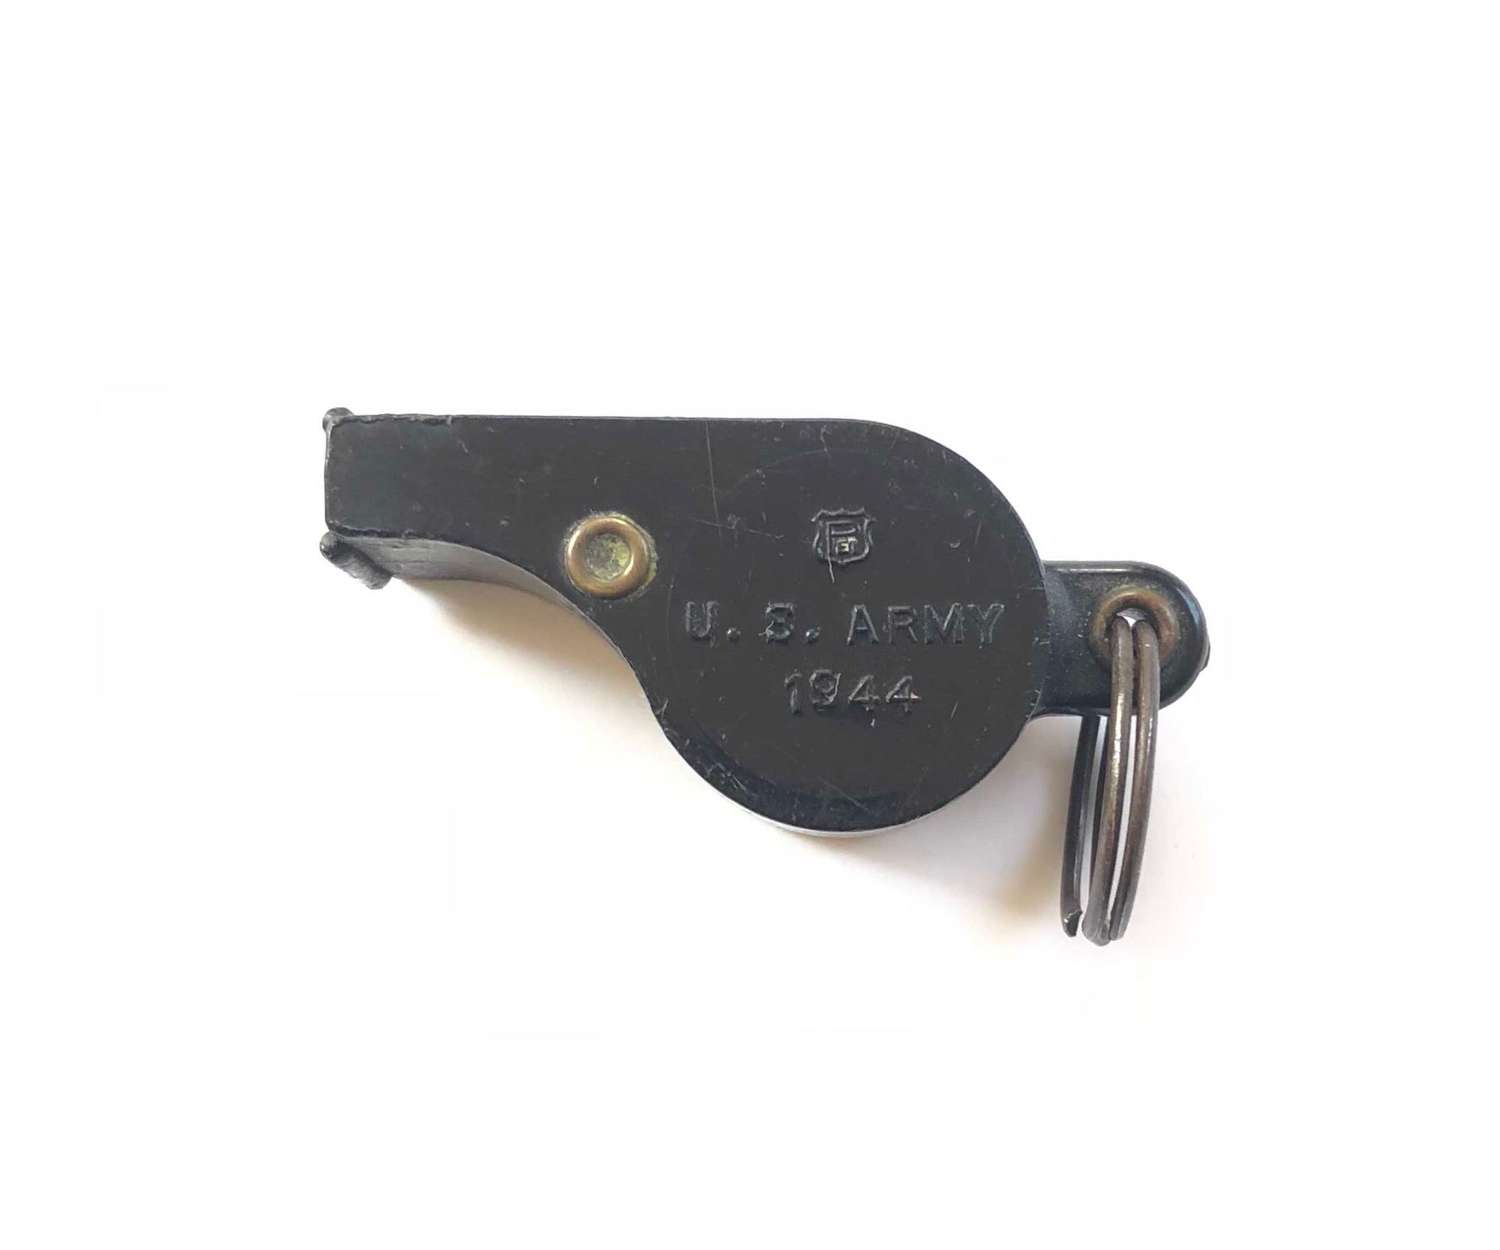 WW2 1944 US Army Whistle.